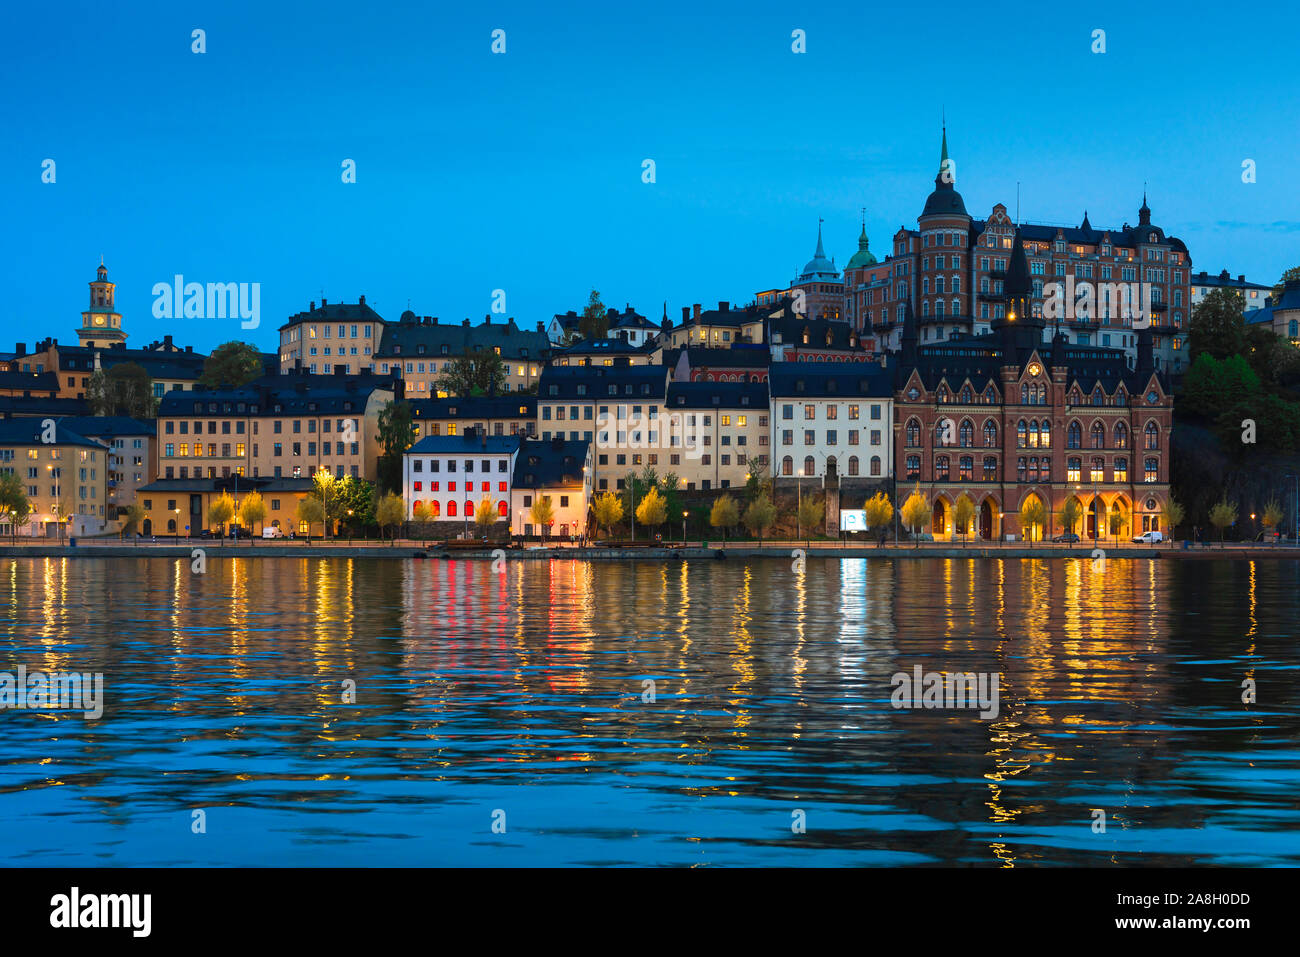 Stockholm night, view on a summer evening of scenic waterfront buildings along Söder Mälarstrand on Södermalm island, central Stockholm, Sweden. Stock Photo